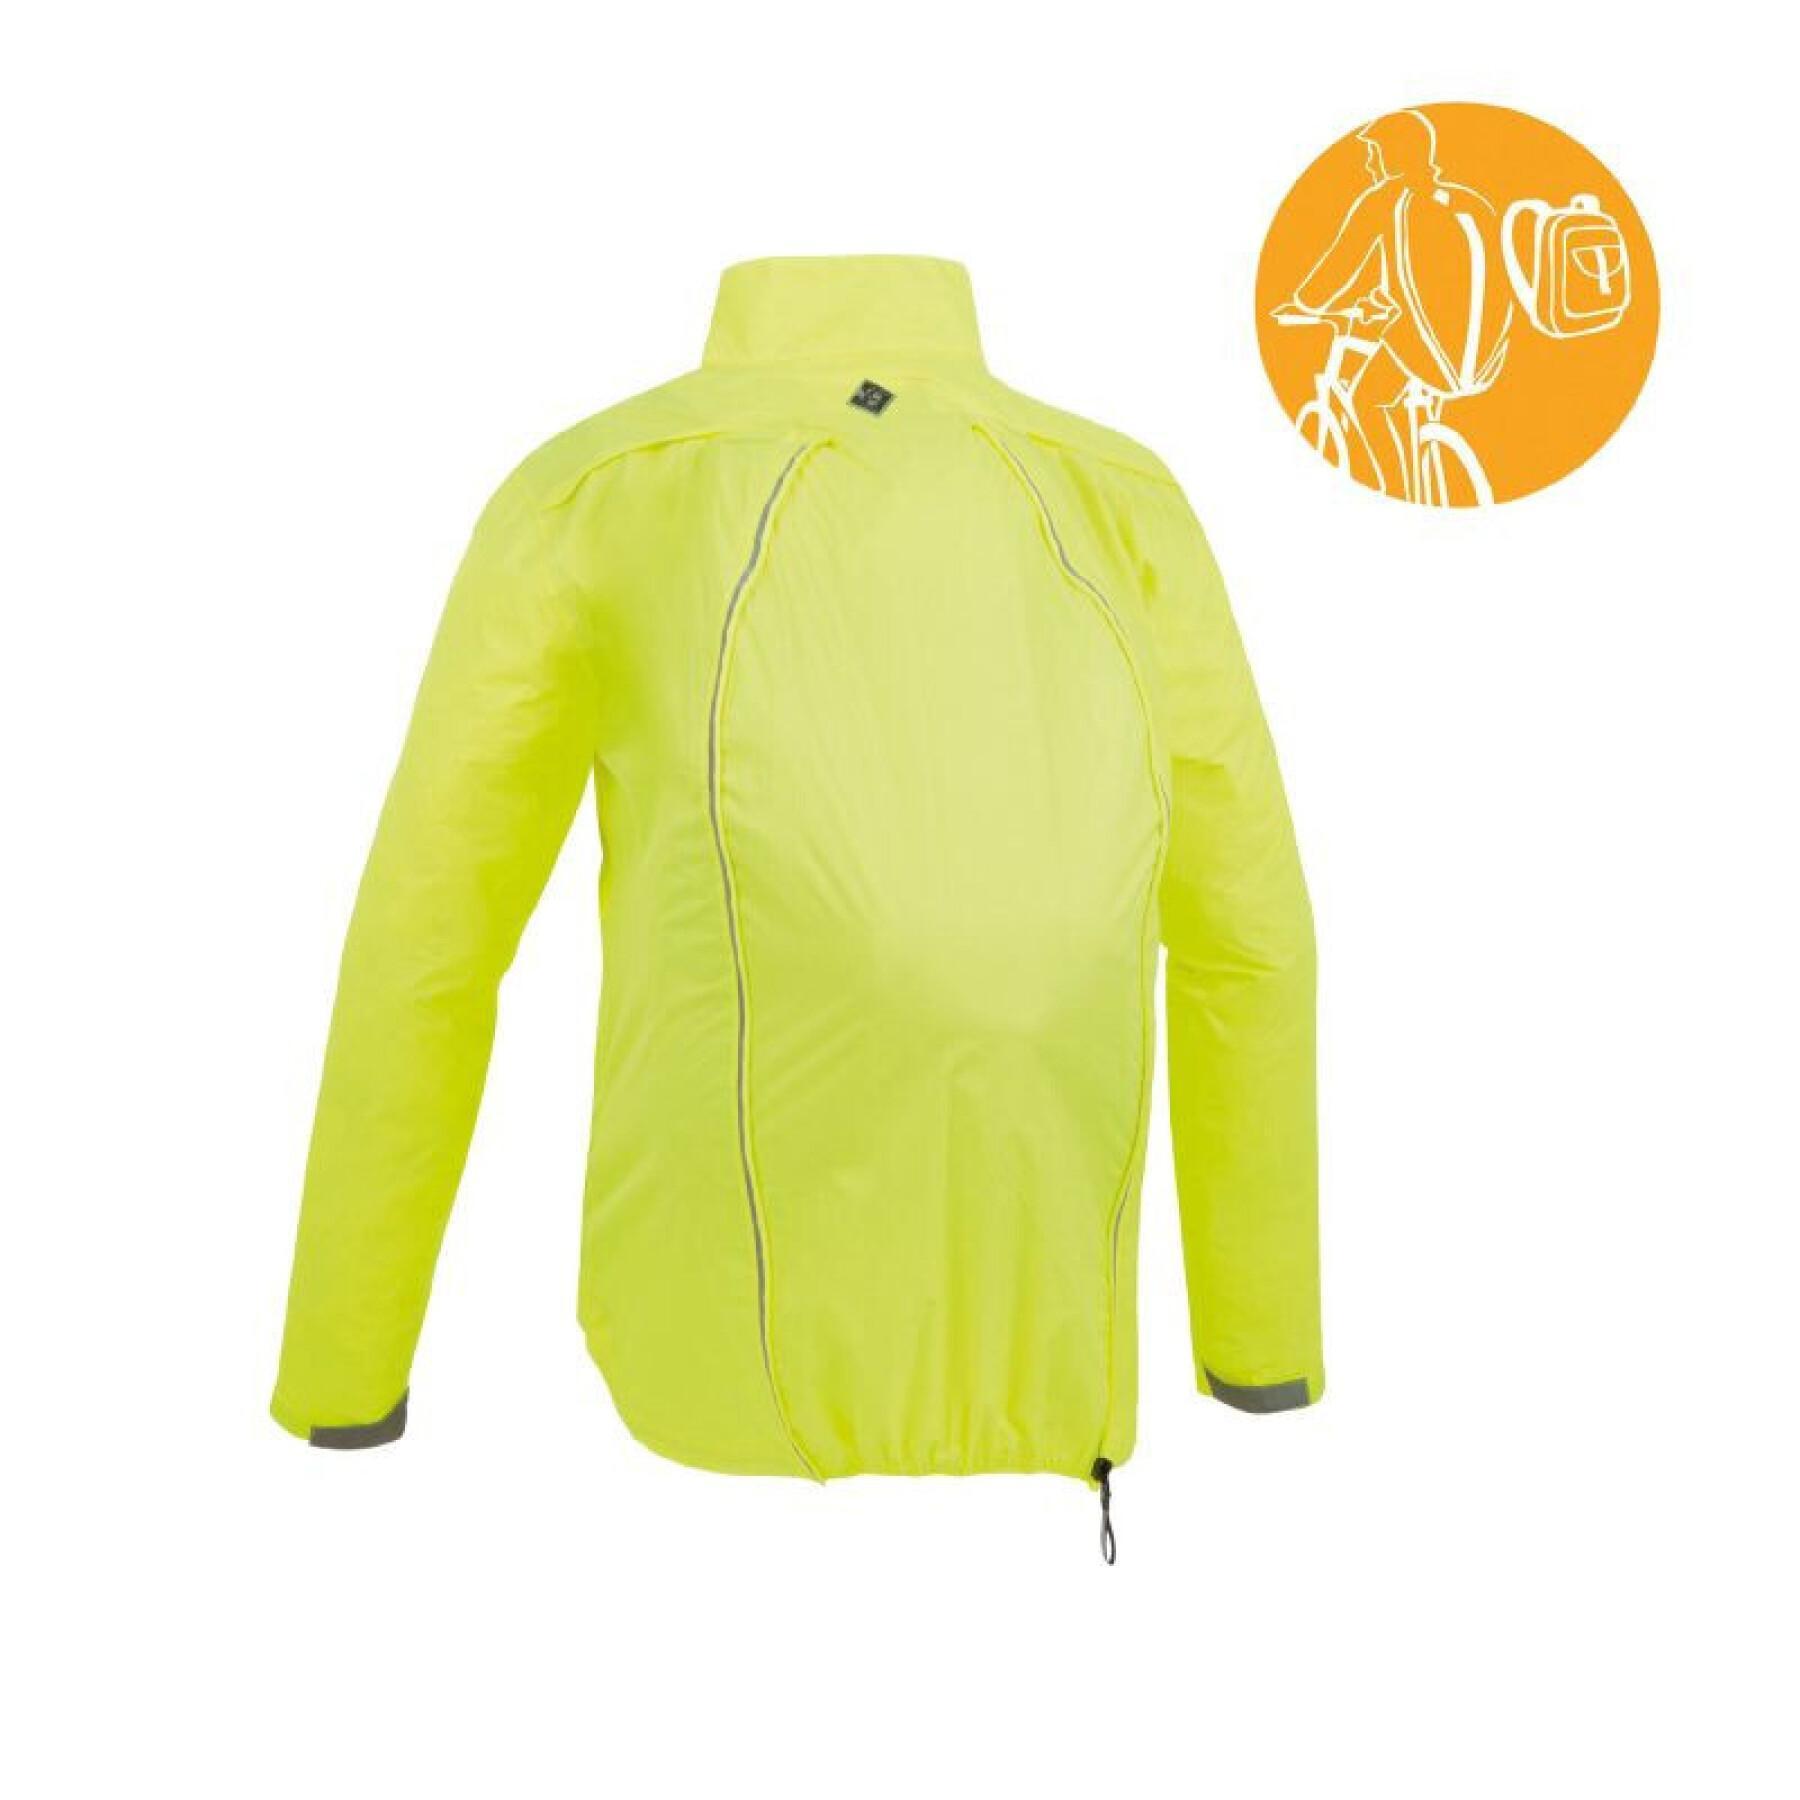 Waterproof jacket with gusset for backpack with ventilation system + reflective inserts Tucano Urbano Nano Rain Zeta